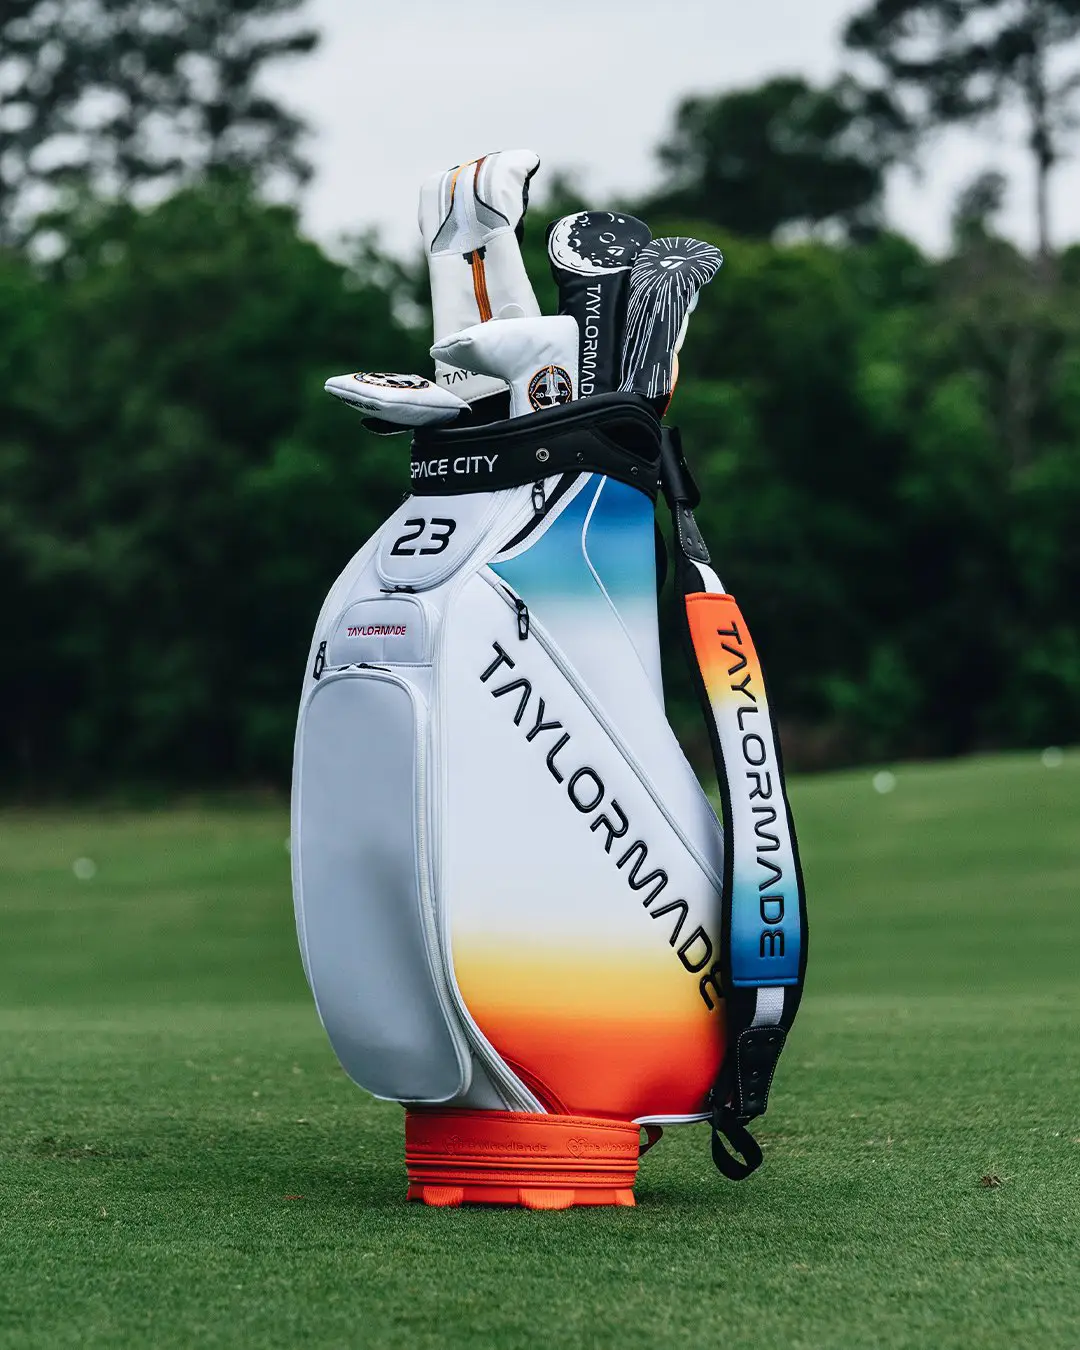 The TaylorMade Chevron Champ Bag, Gallery posted by Dennis Kennedy